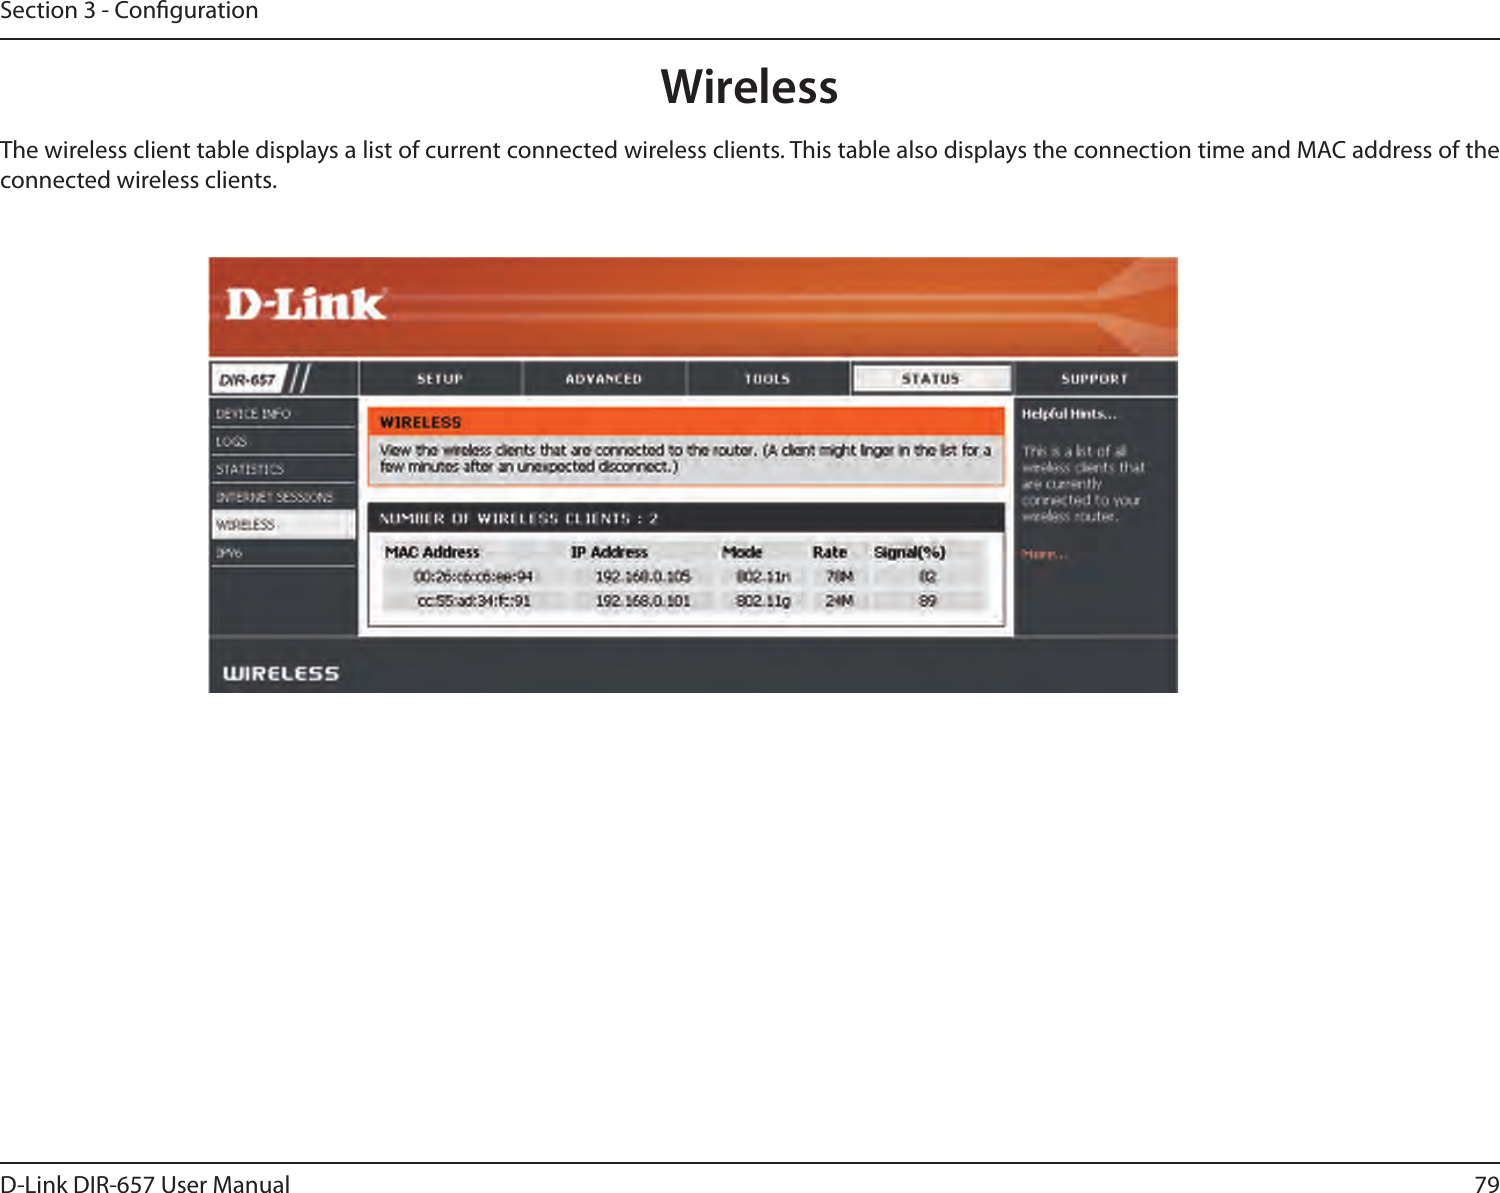 79D-Link DIR-657 User ManualSection 3 - CongurationThe wireless client table displays a list of current connected wireless clients. This table also displays the connection time and MAC address of the connected wireless clients.Wireless